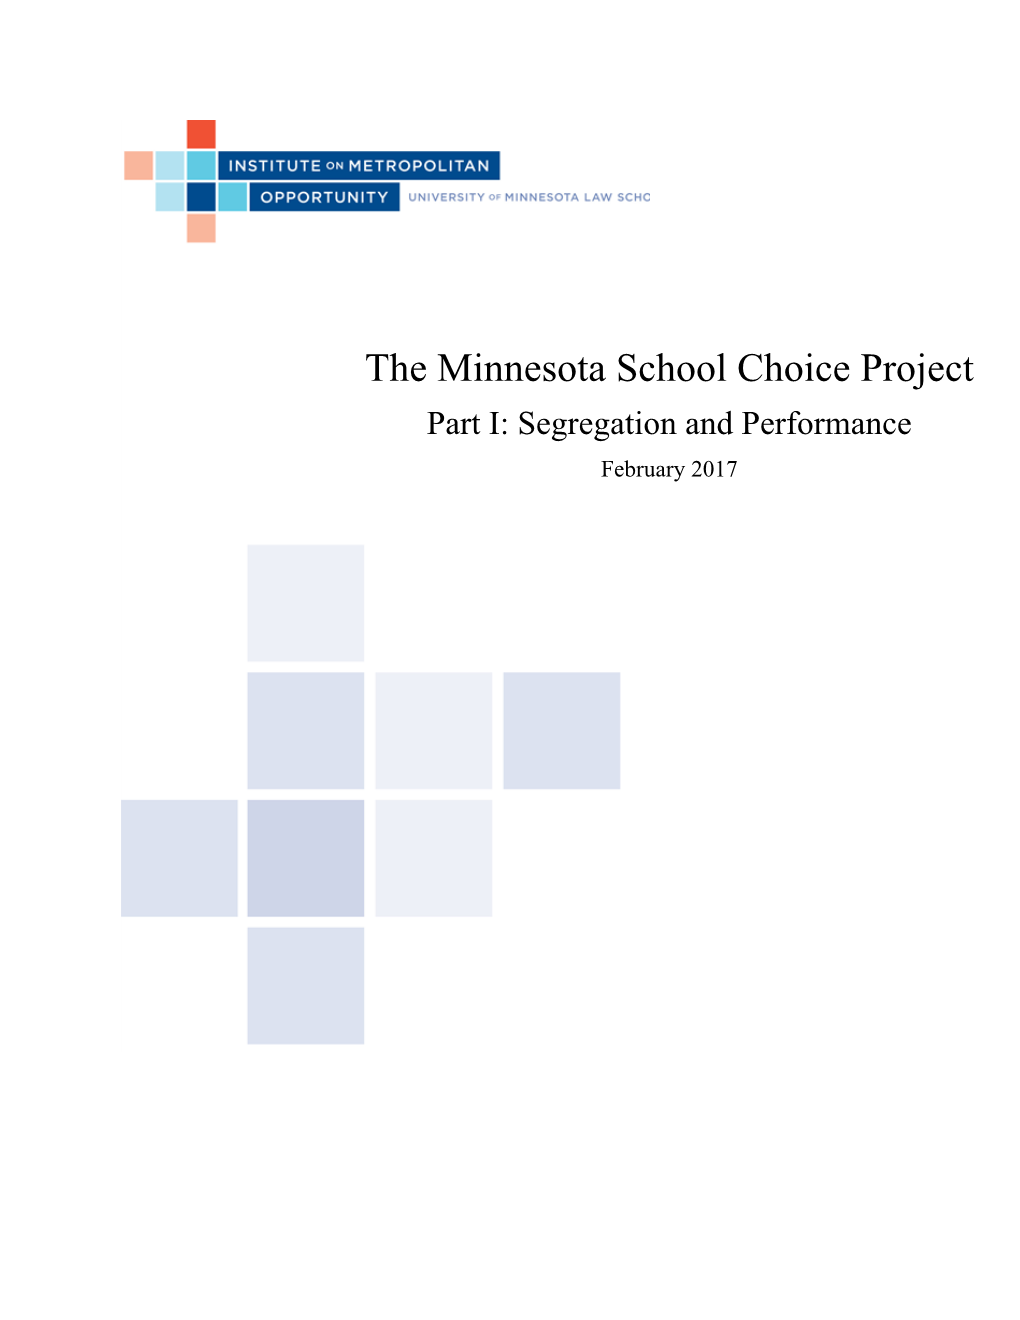 "The Minnesota School Choice Project: Part I: Segregation And